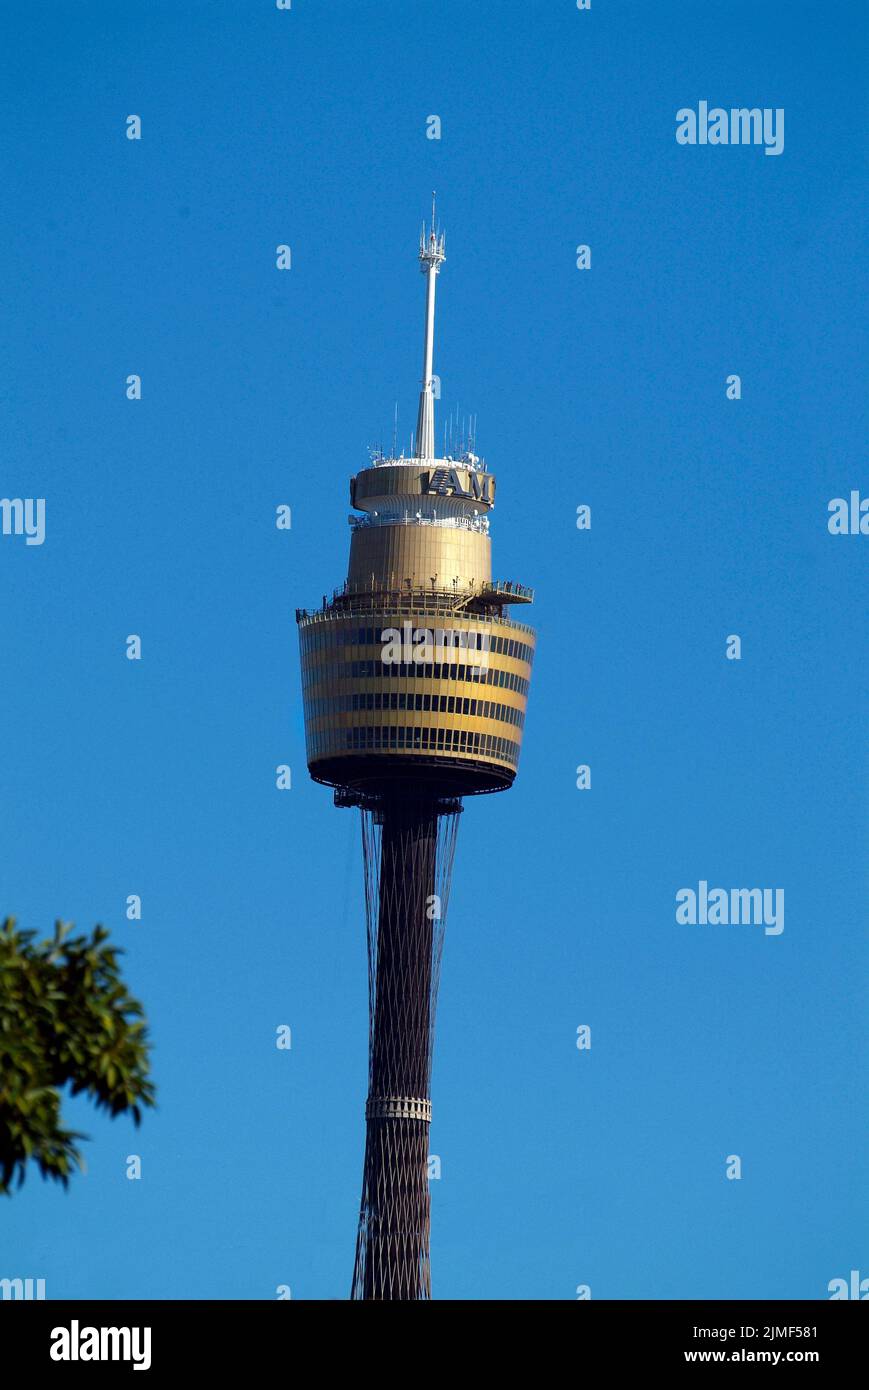 Sydney, Australia - May 07, 2010: Sydney Tower, formerly AMP Tower and Centrepoint Tower, is a television and observation tower with restaurant and gr Stock Photo